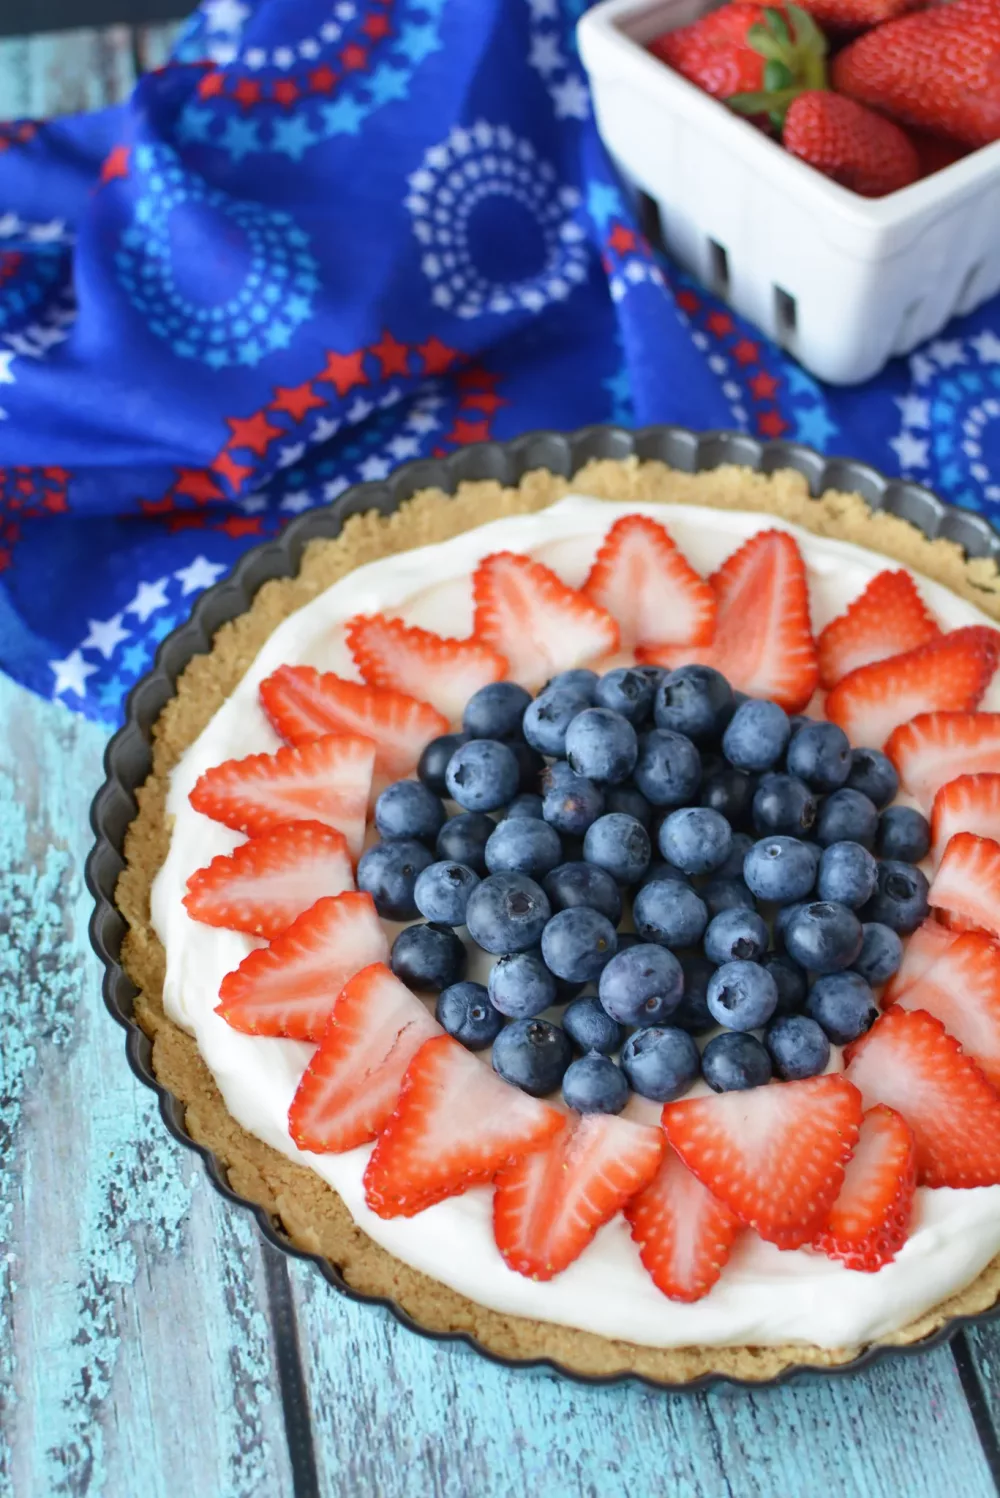 tart filled with cream cheese filling and decorated with blueberries and strawberries